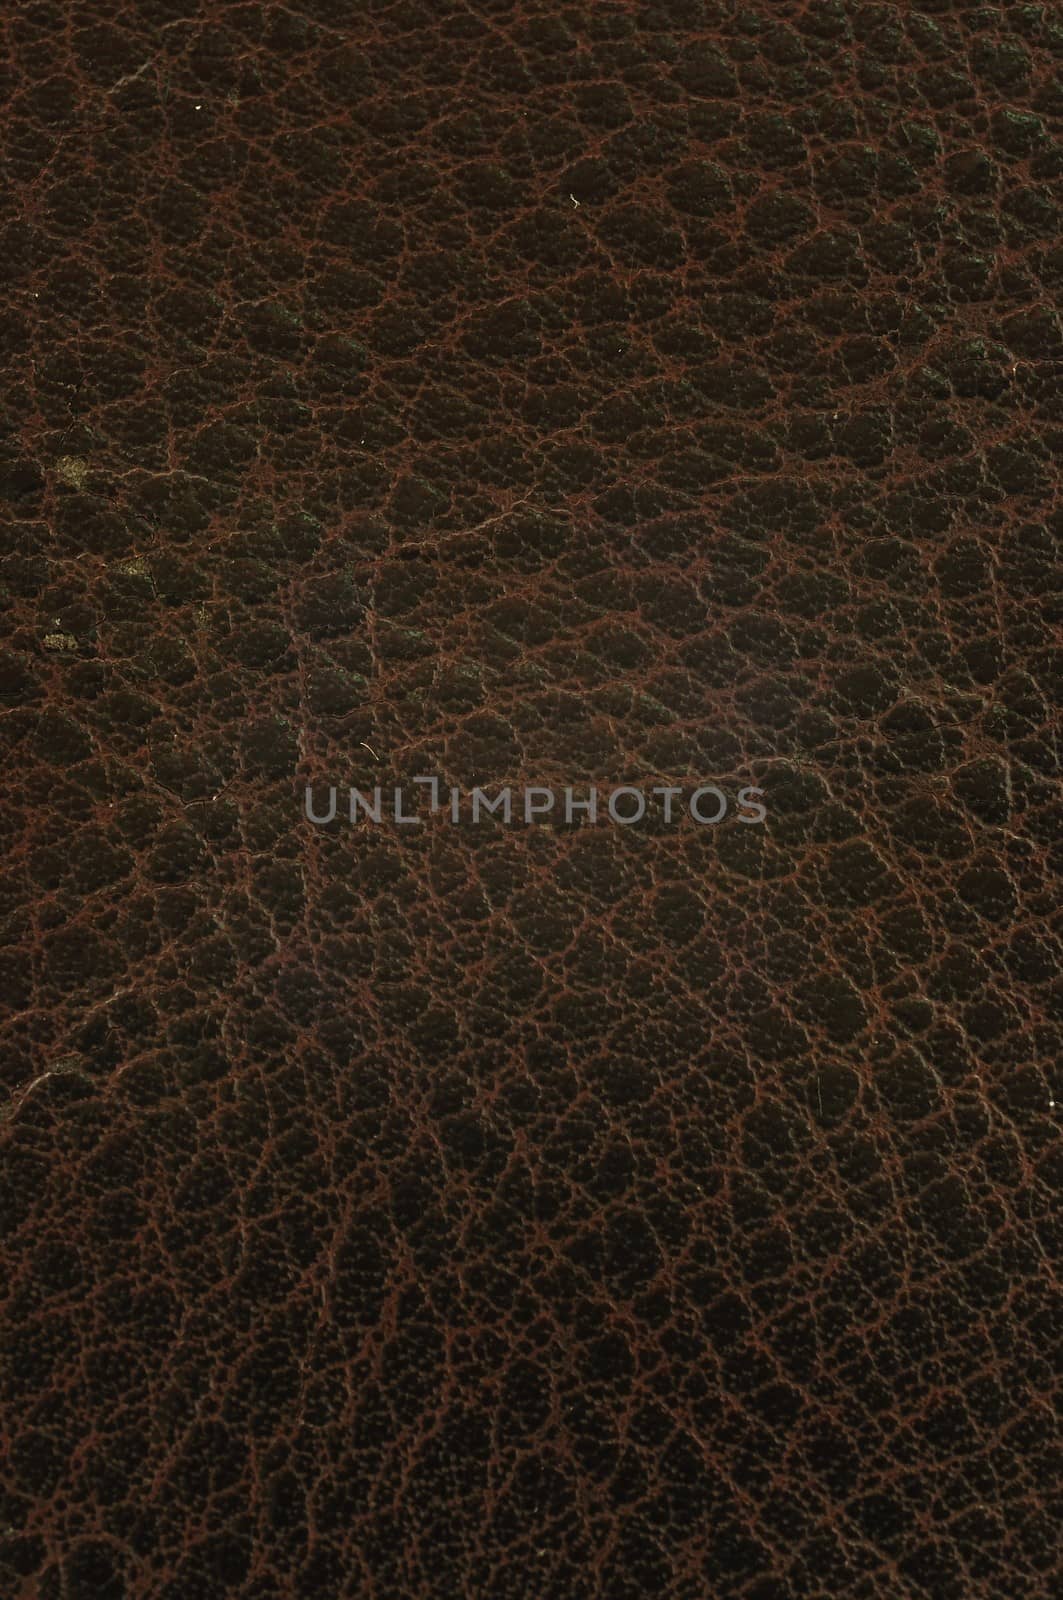 Grunge Texture background of Brown Cow leather